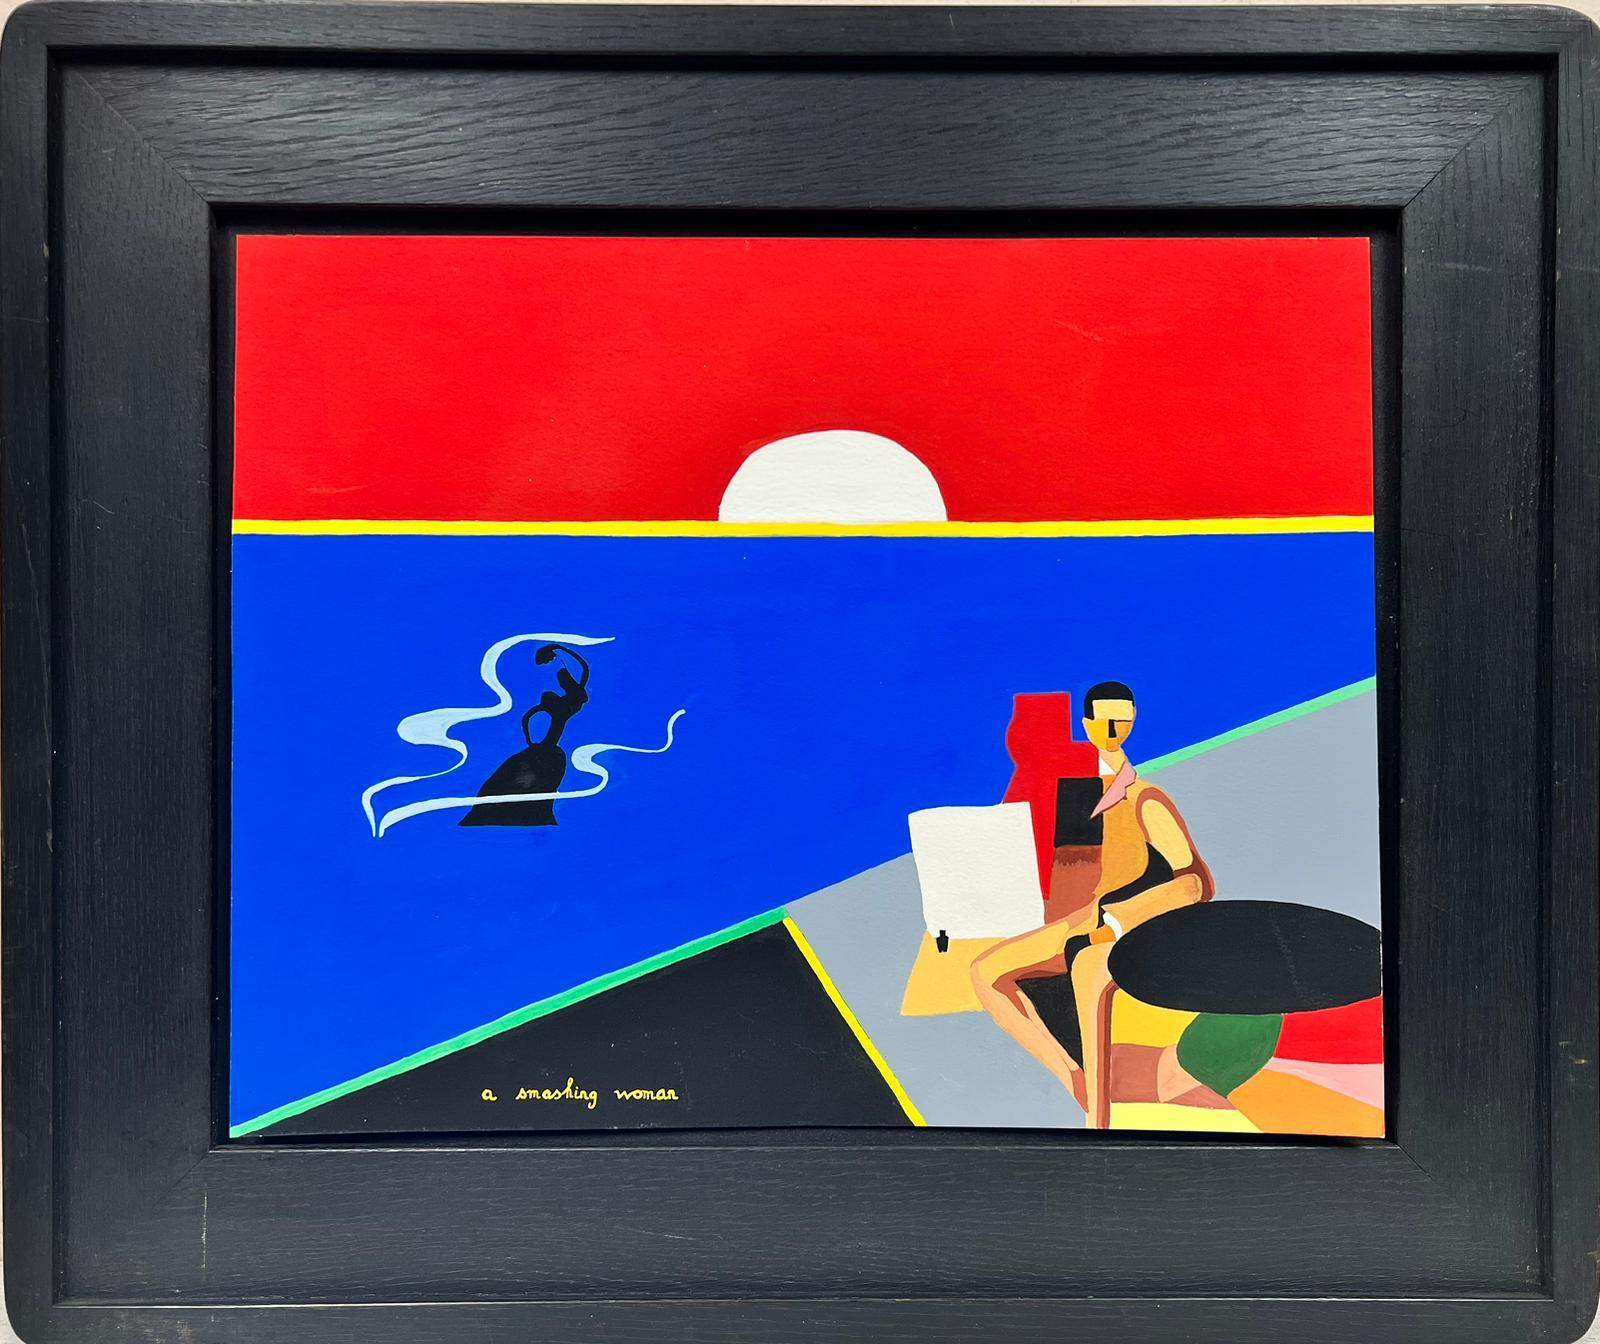 Contemporary British 
acylic painting on paper stuck on board, in a black frame
framed: 16 x 18.5 inches
paper: 11 x 13.5 inches
private collection
the painting is in overall very good and sound condition/ small scratch on black frame